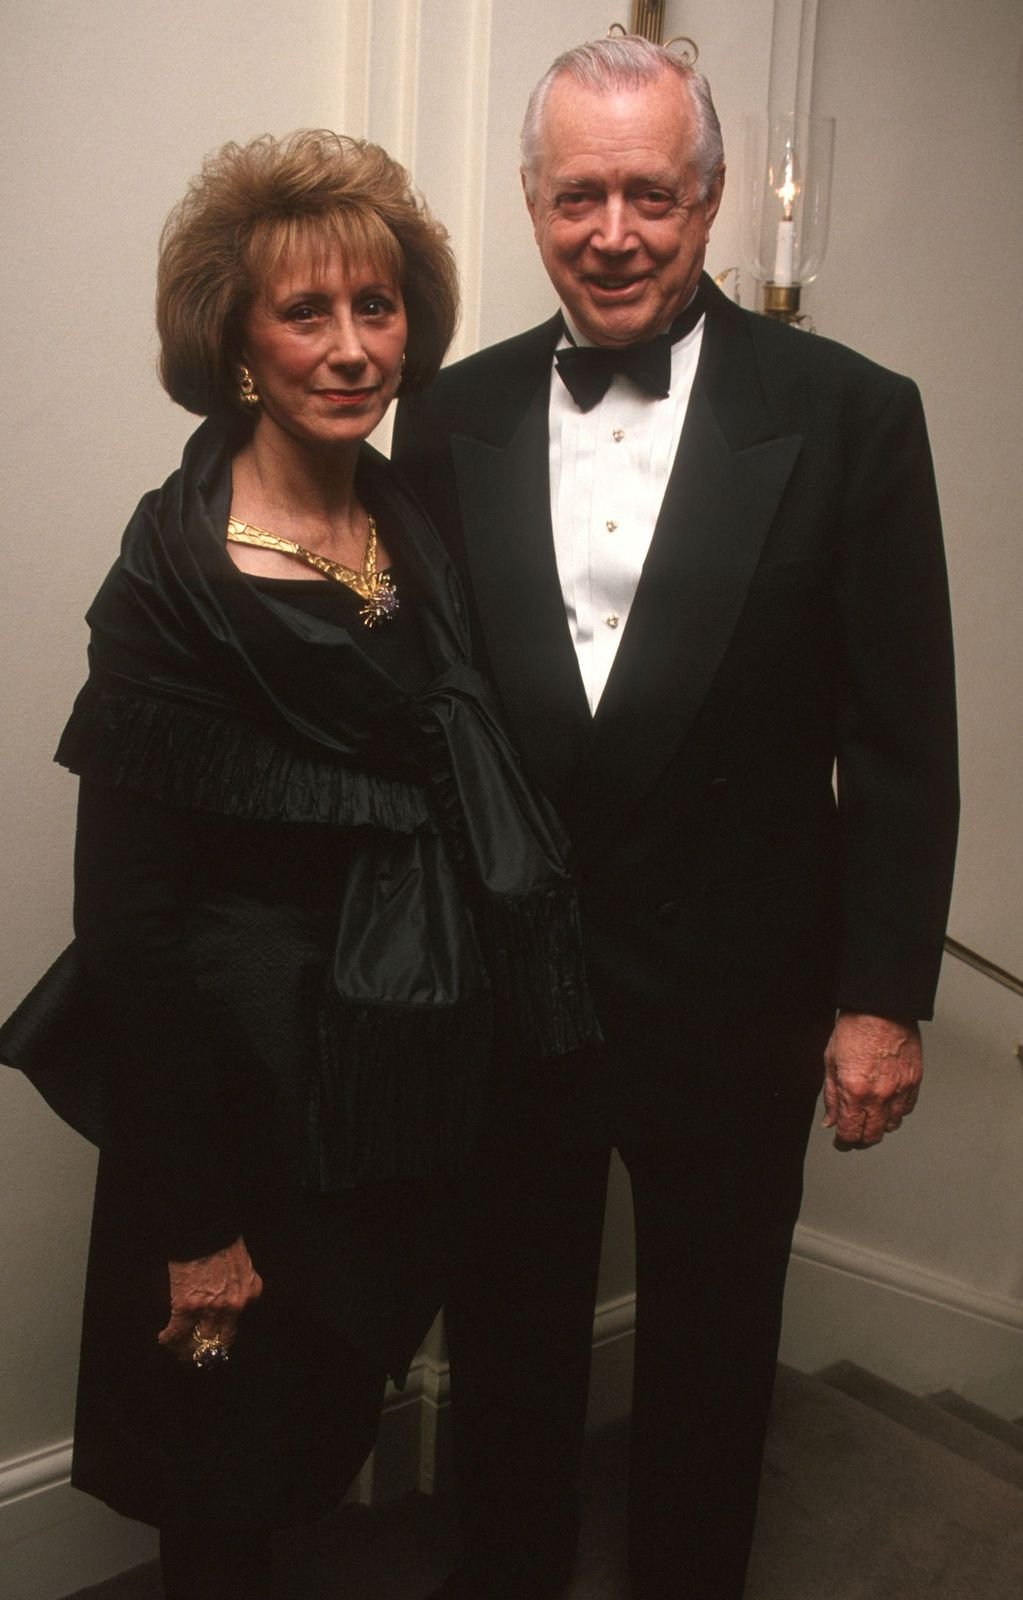 Ruth and Hugh Downs during CASA Honors James and Daniel Burke in New York City | Photo: Getty Images